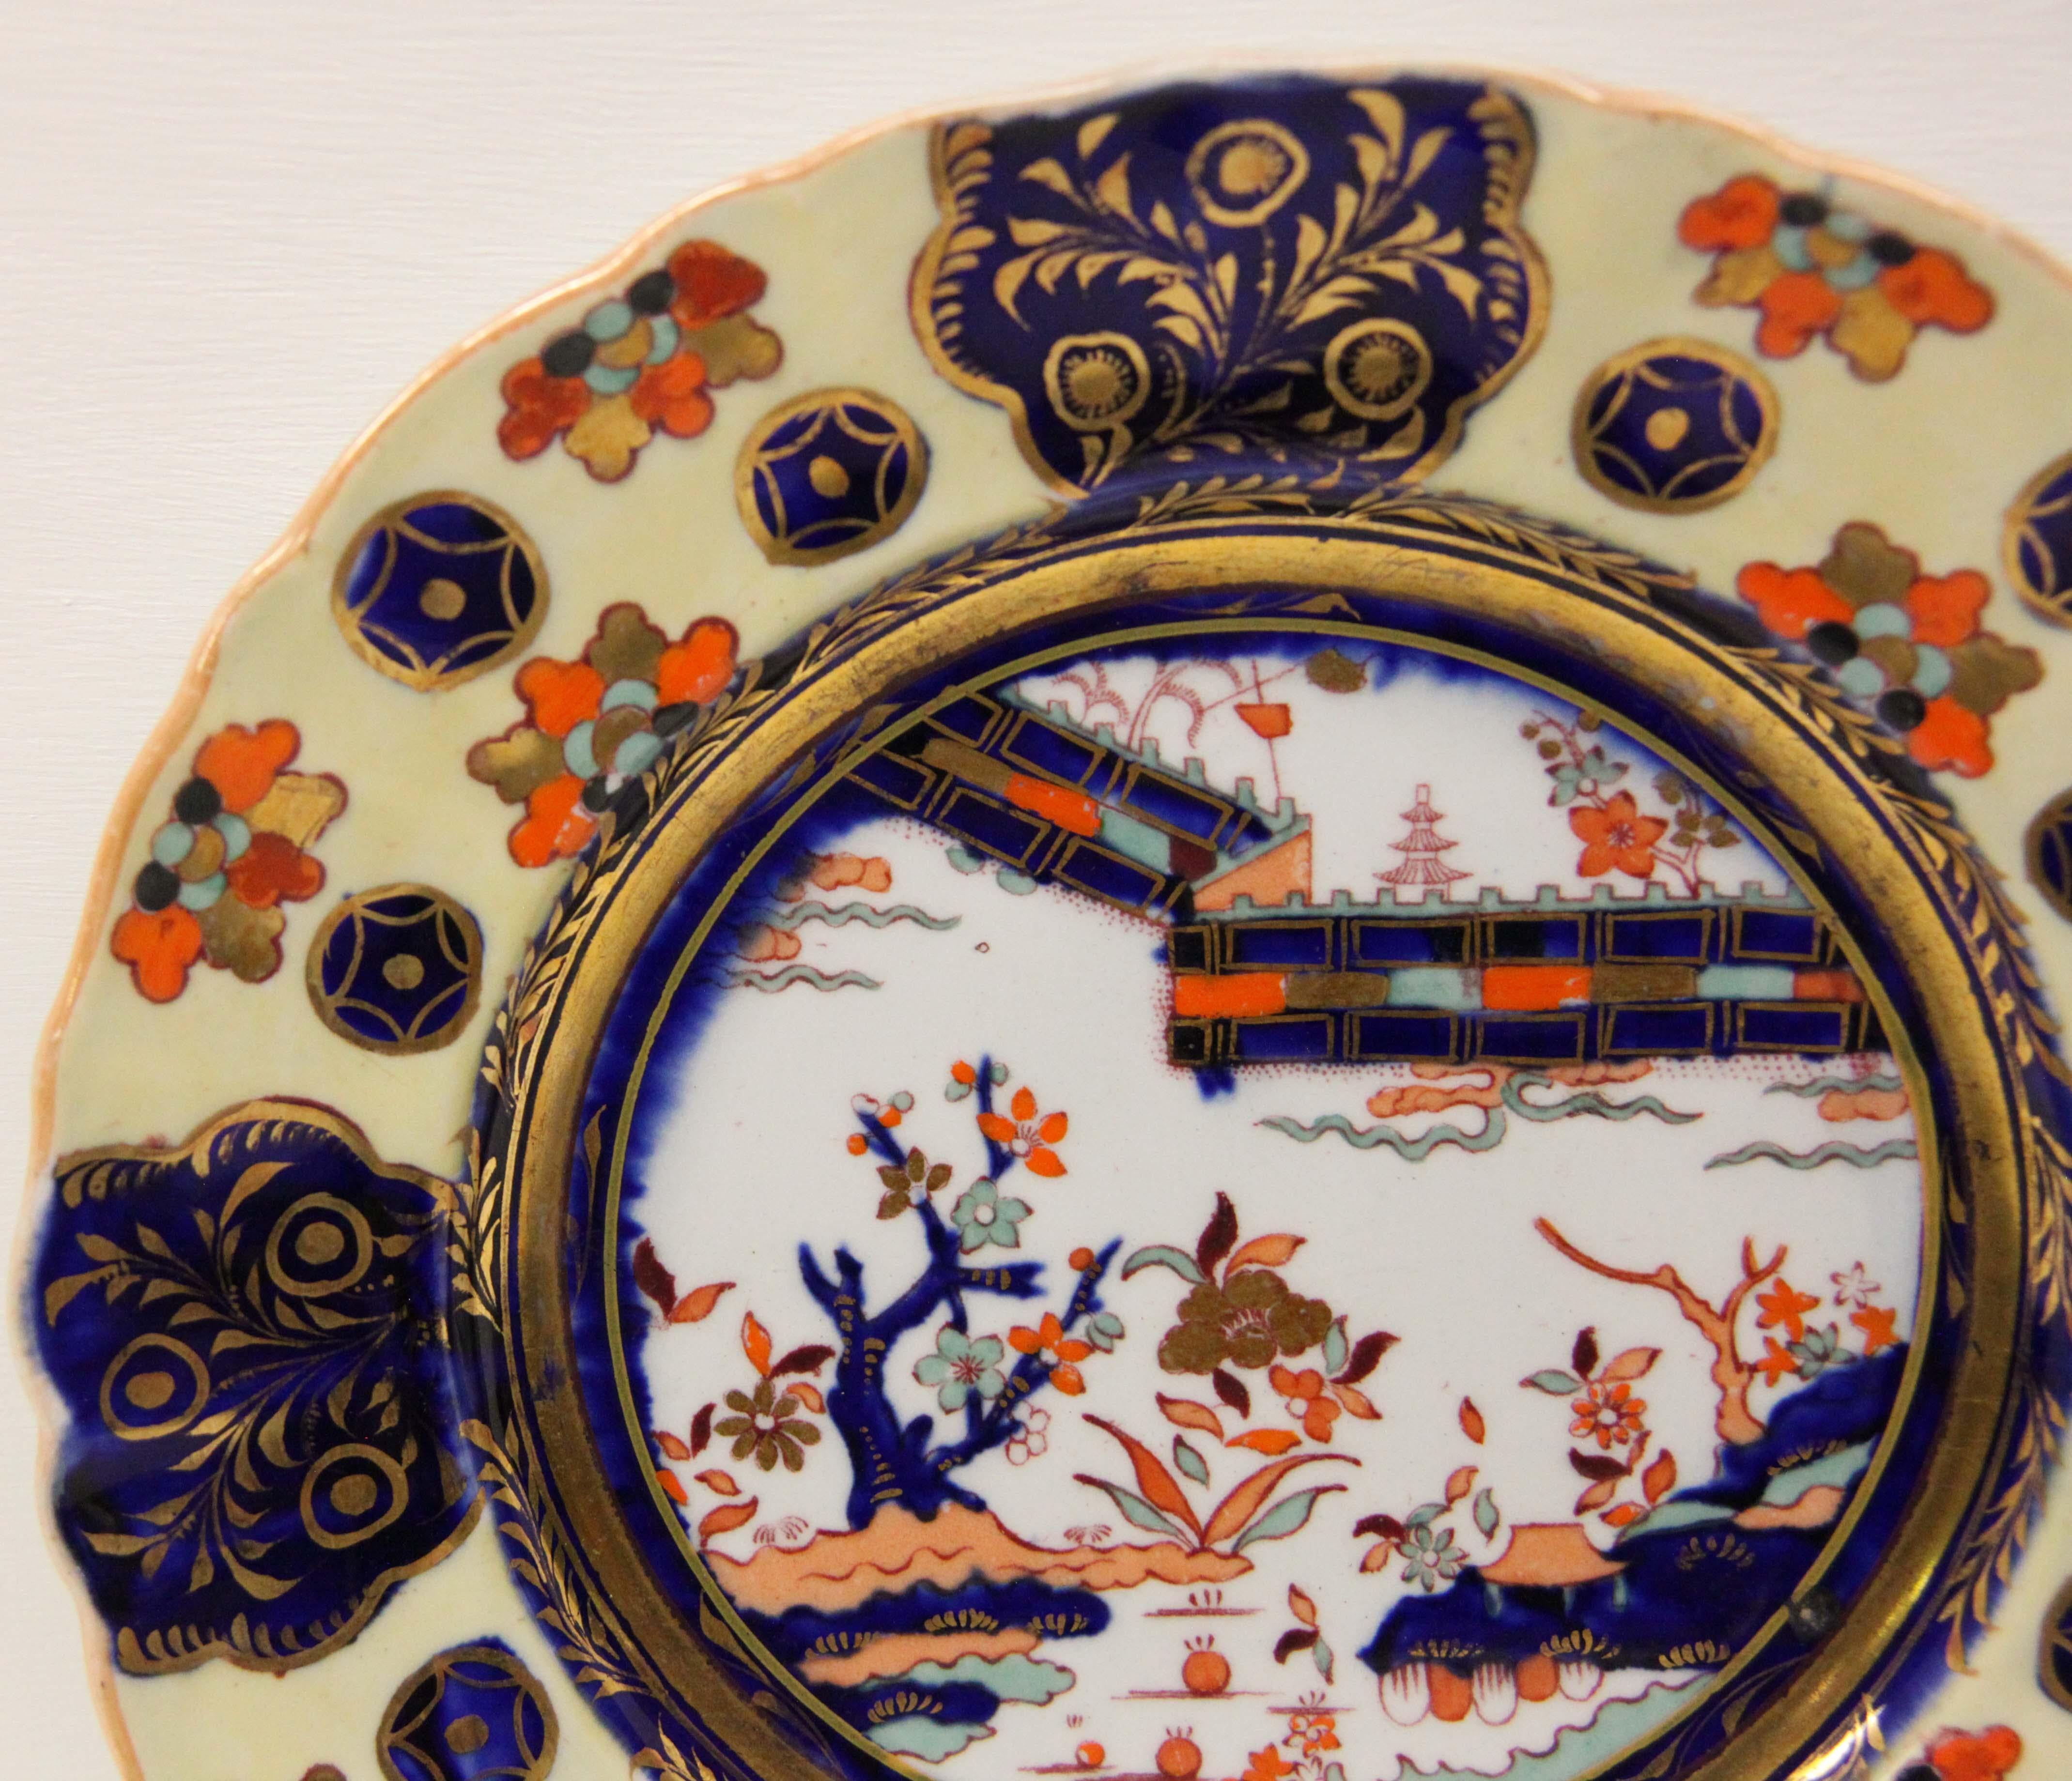 Set of Six Mason's ironstone plates, the light yellow border highlighted with flowers, stylized stars and gilt foliate on a cobalt background, the center with oriental motifs. According to Geoffrey Godden's Encyclopedia of British Pottery and